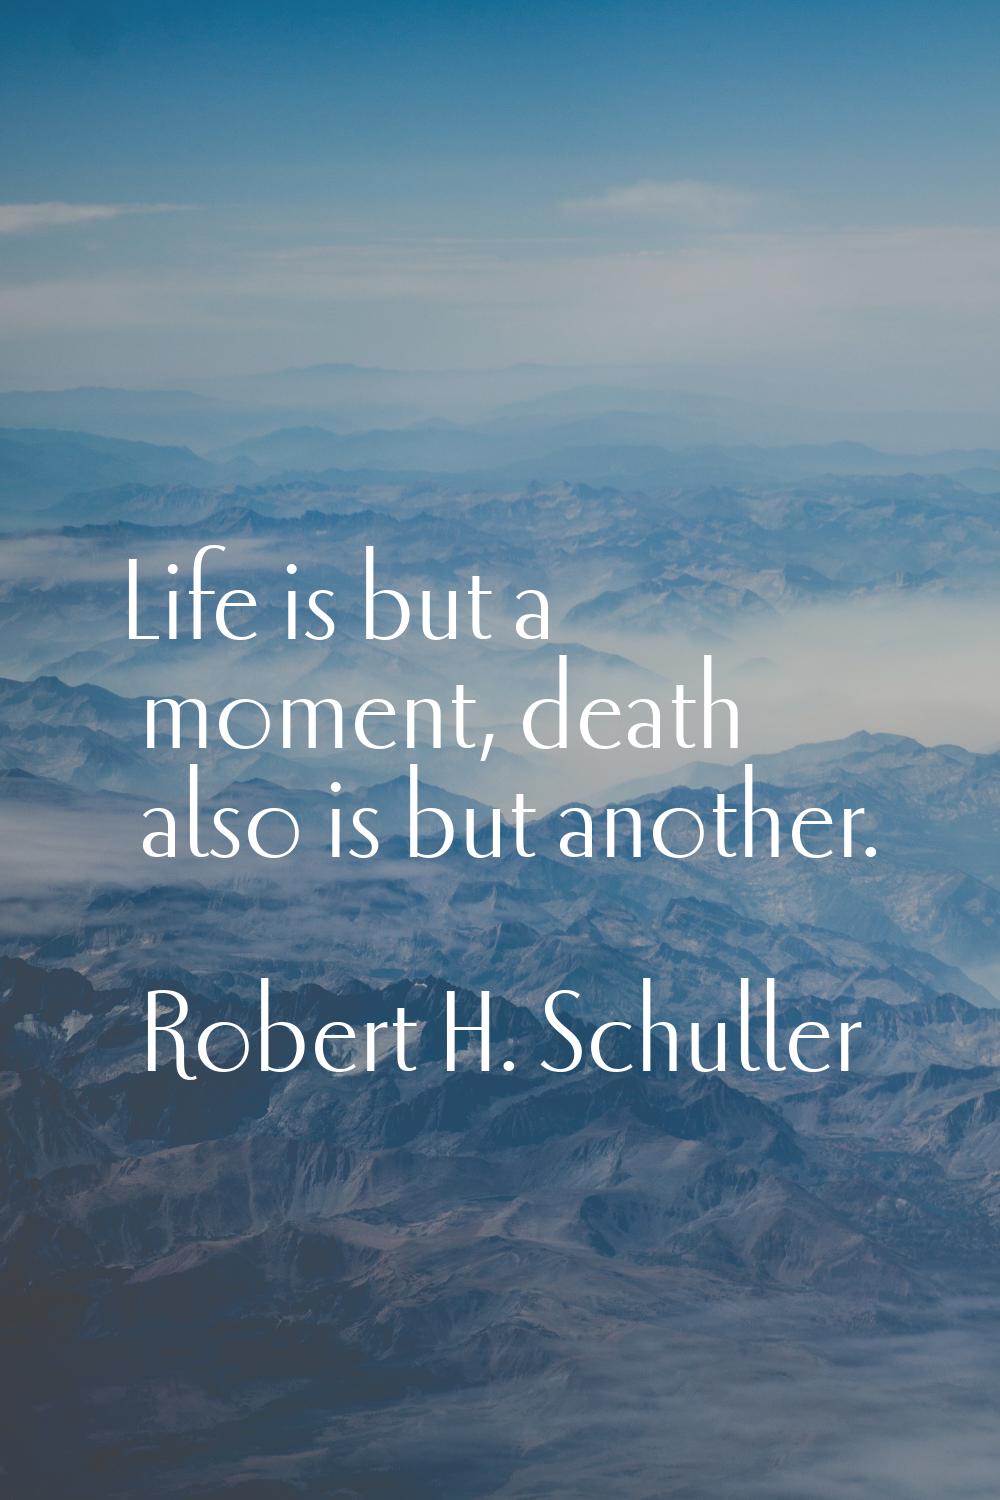 Life is but a moment, death also is but another.